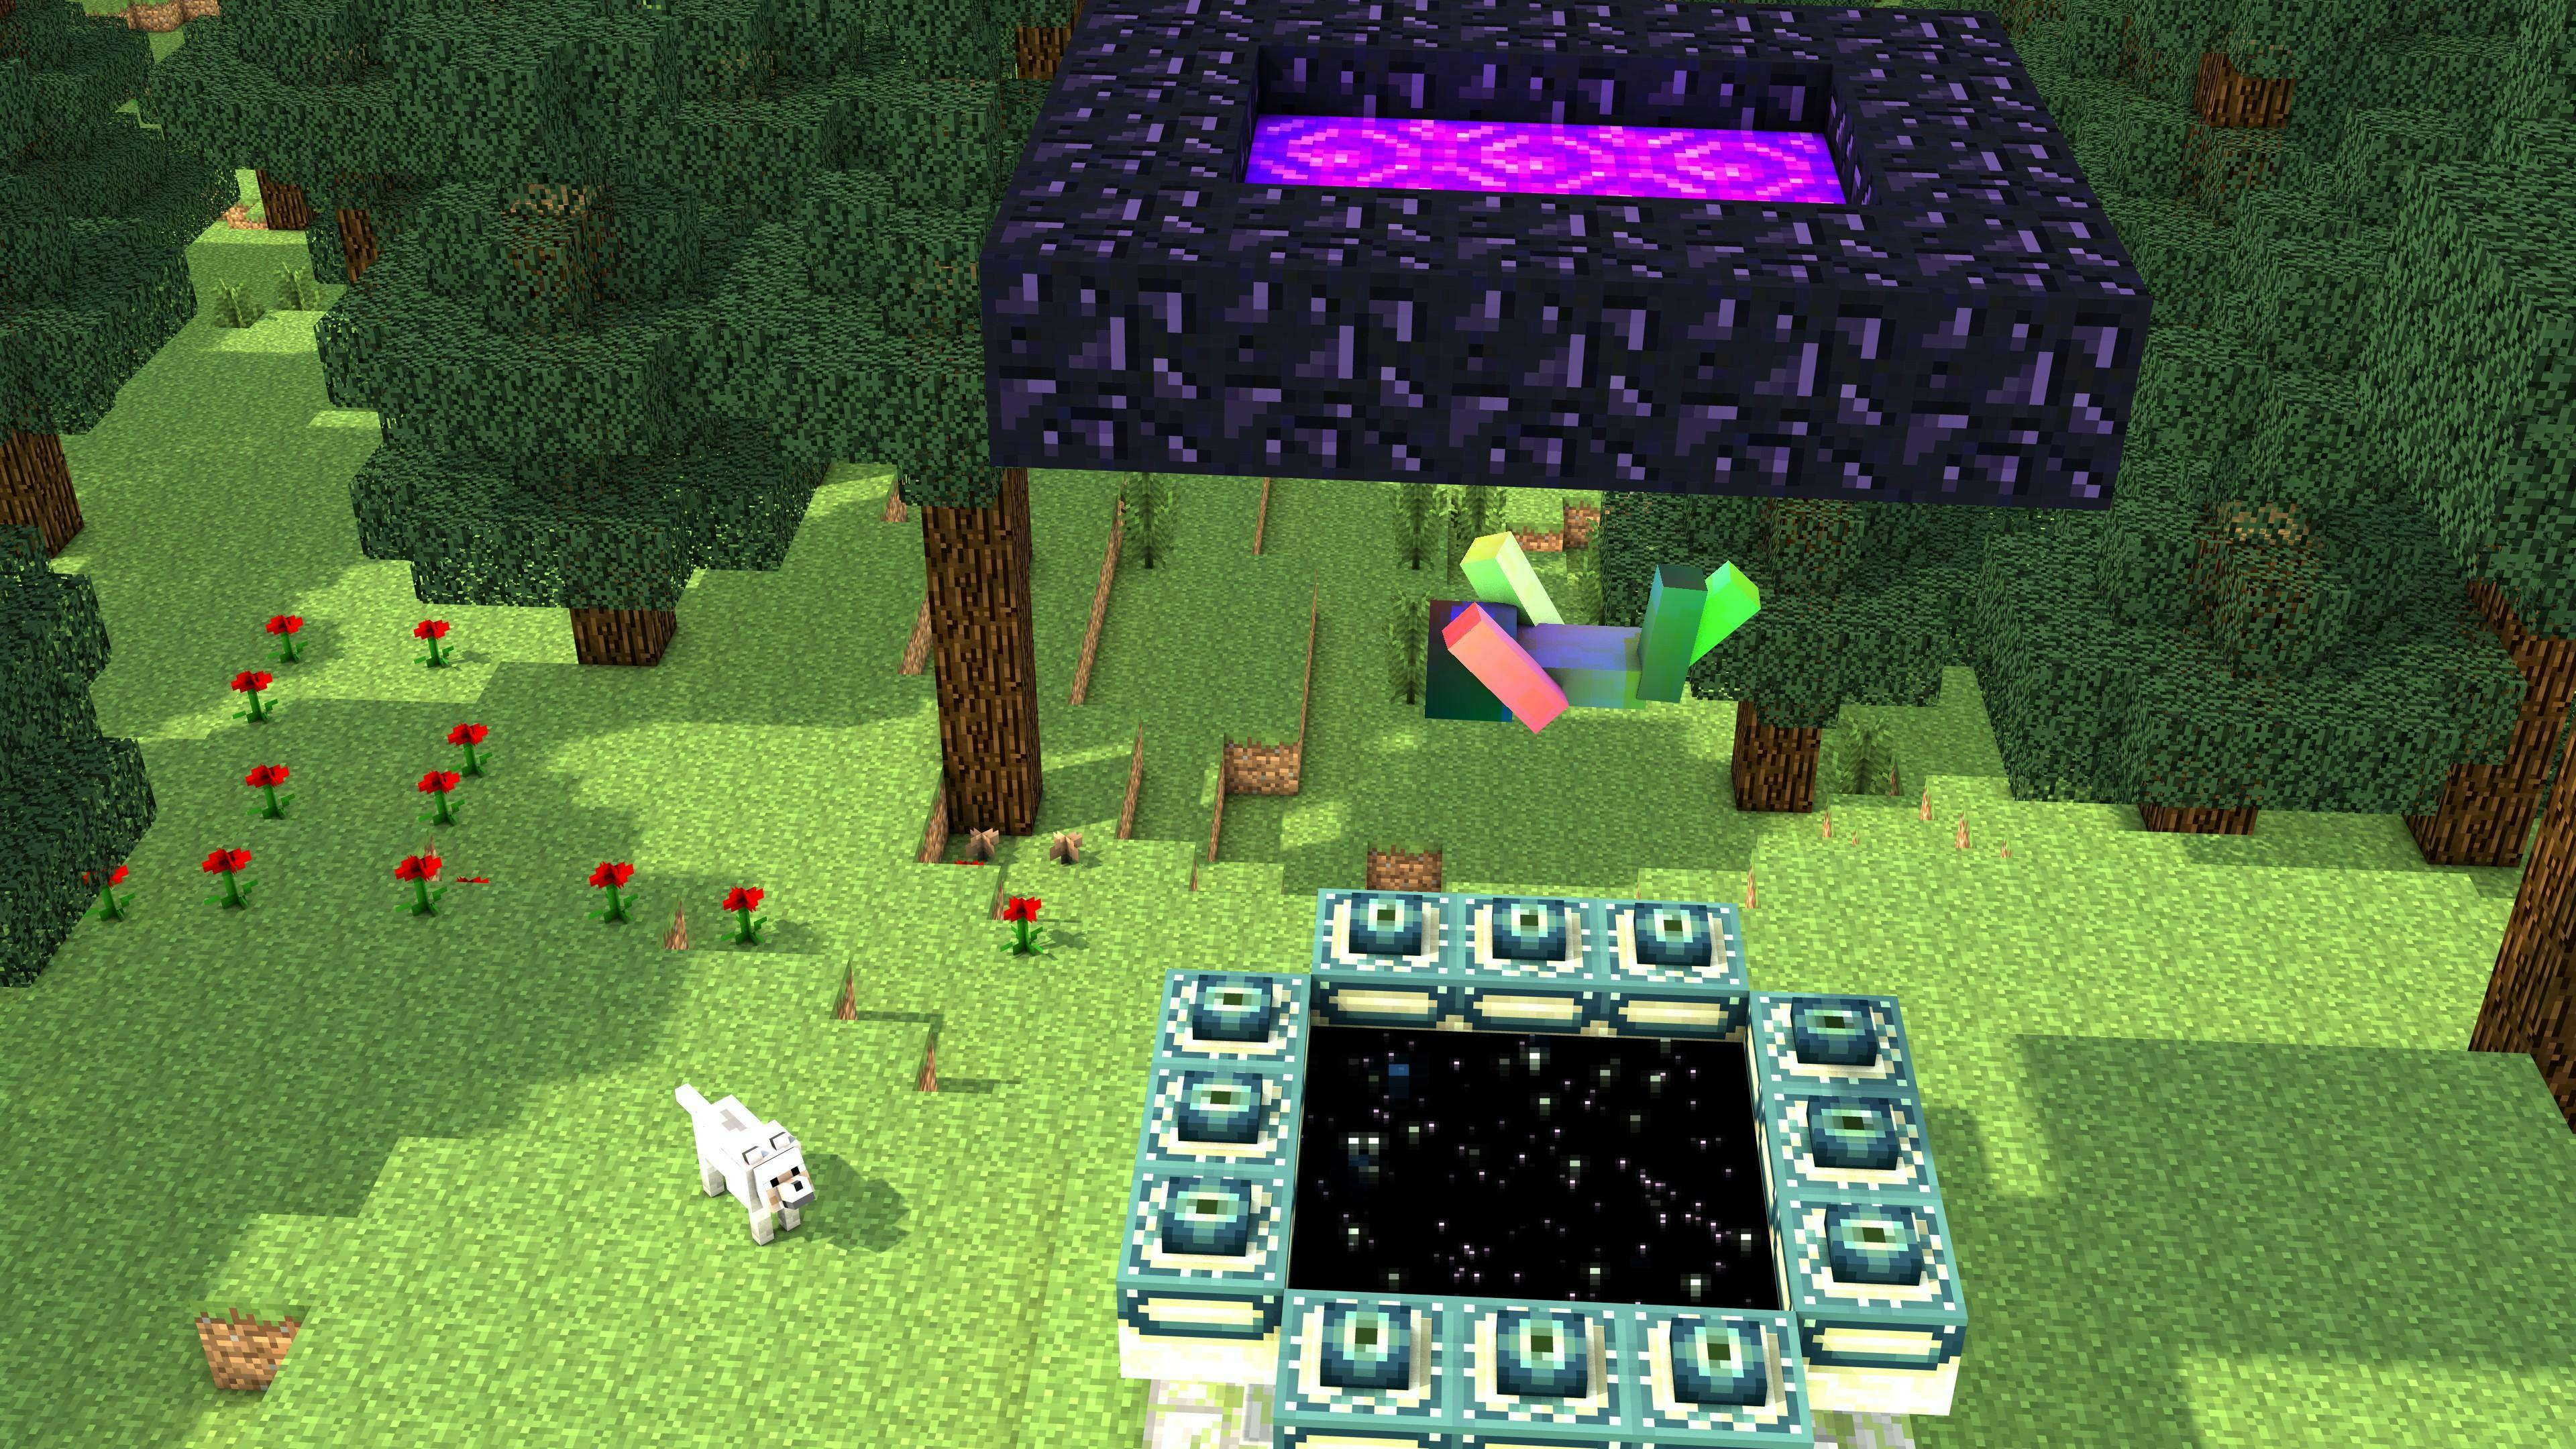 From the Nether to the Ender